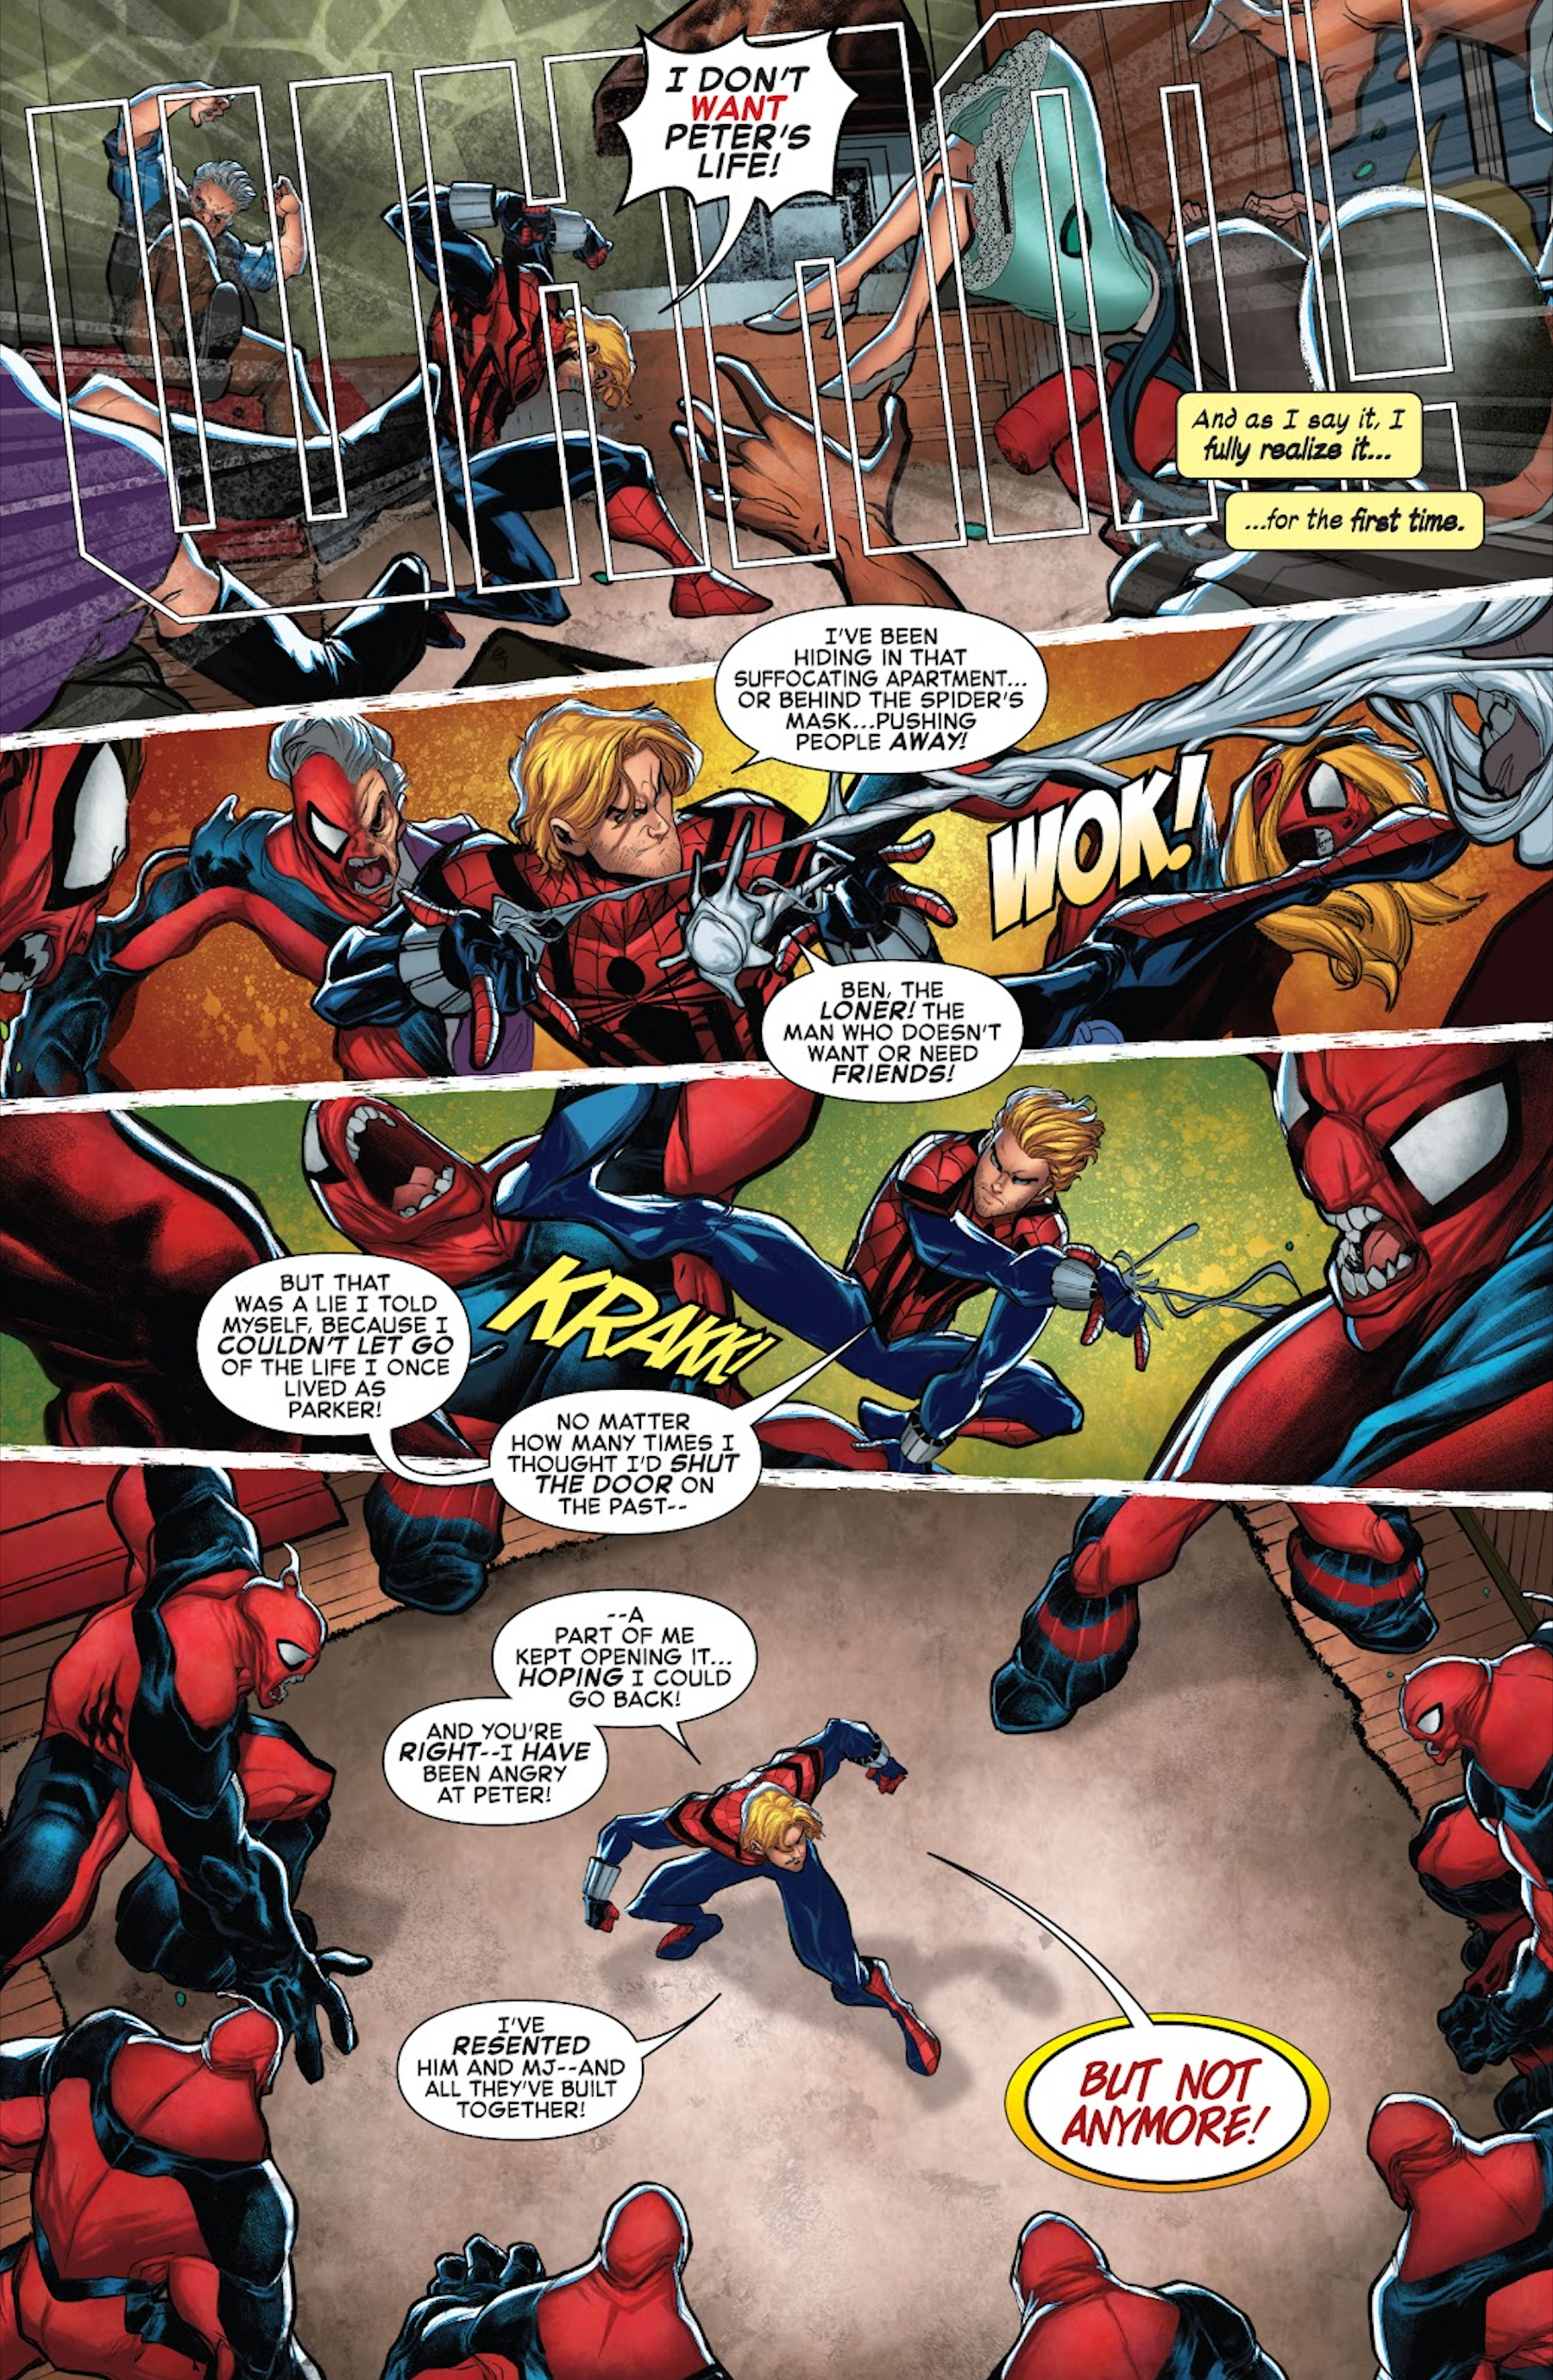 Ben Reilly rejects the life of Spider Man